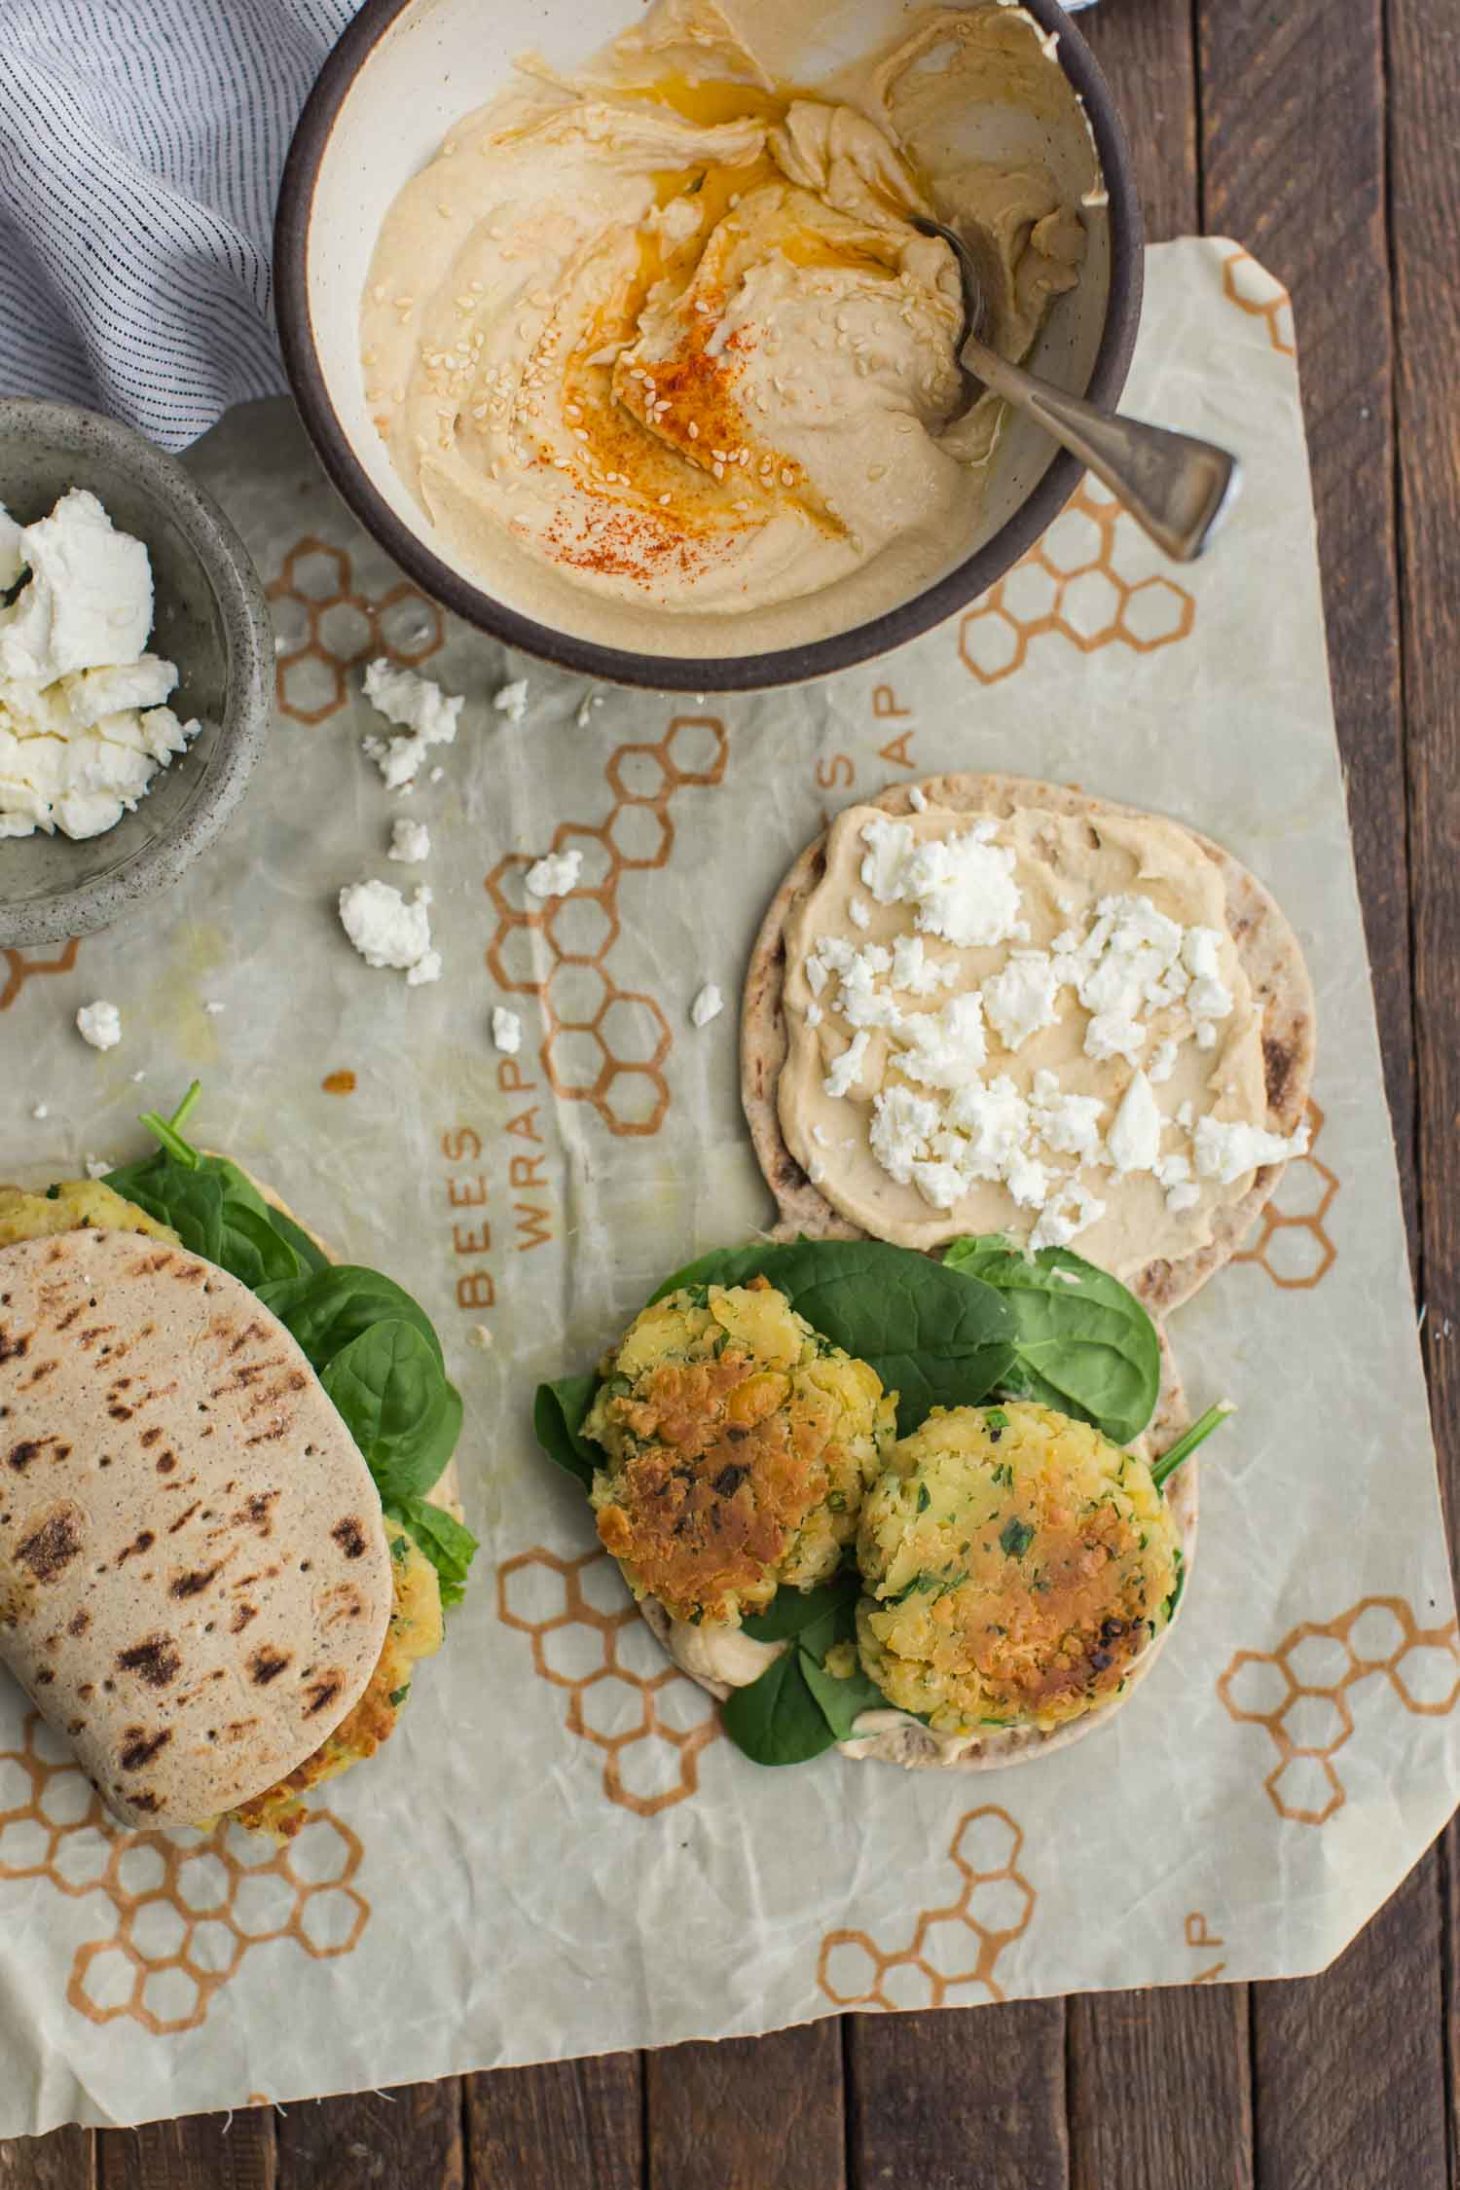 Chickpea Fritter Sandwich with Hummus and Spinach | Naturally Ella